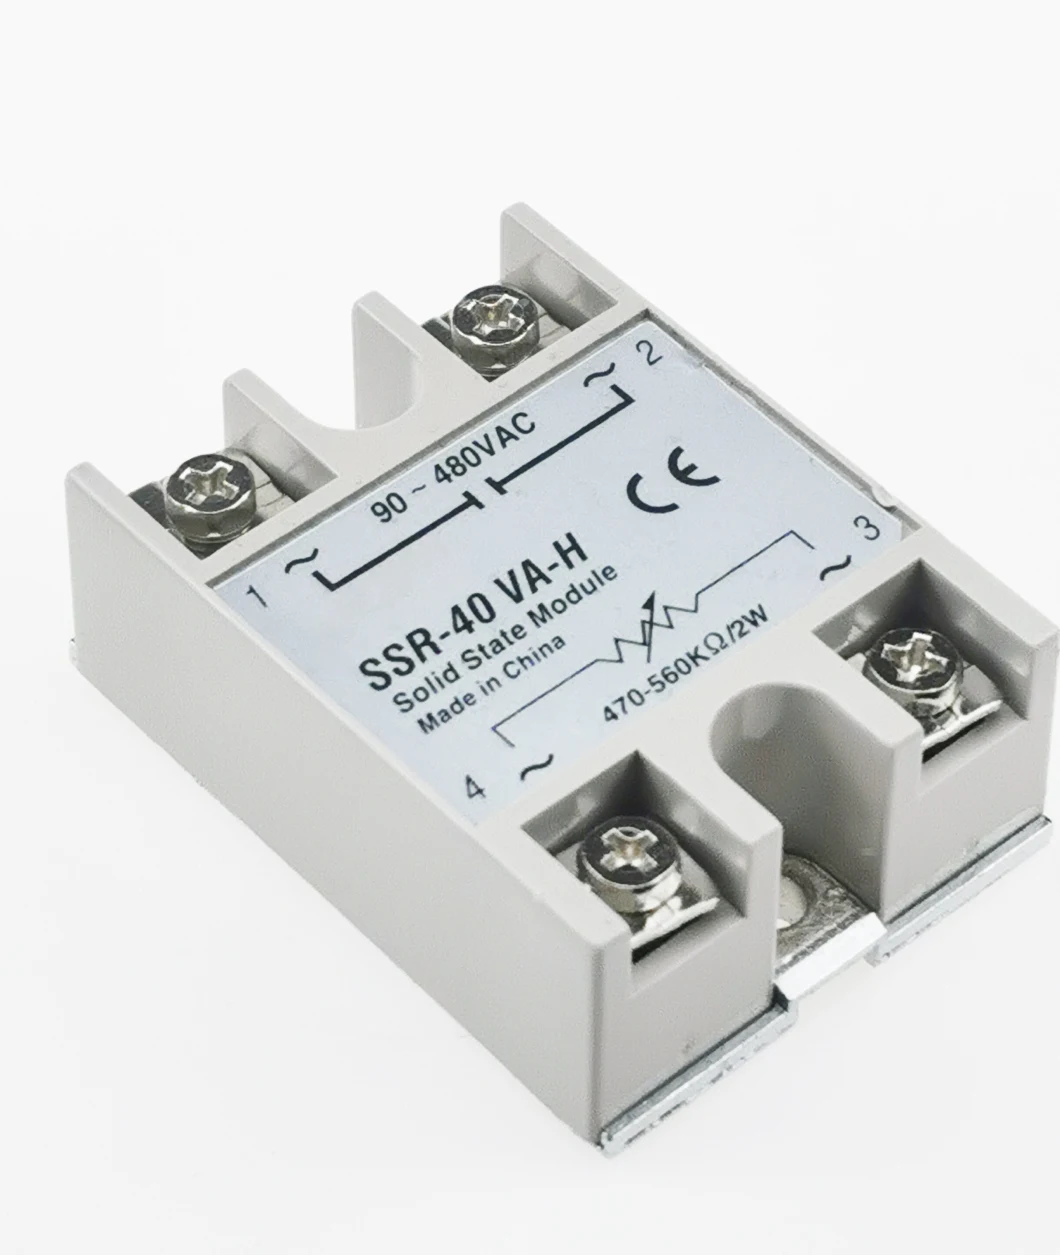 SSR-40da-H, Sigle Phase Solid State Relay, 3-32VDC/90-480VAC, Ce Proved Solid State Relay